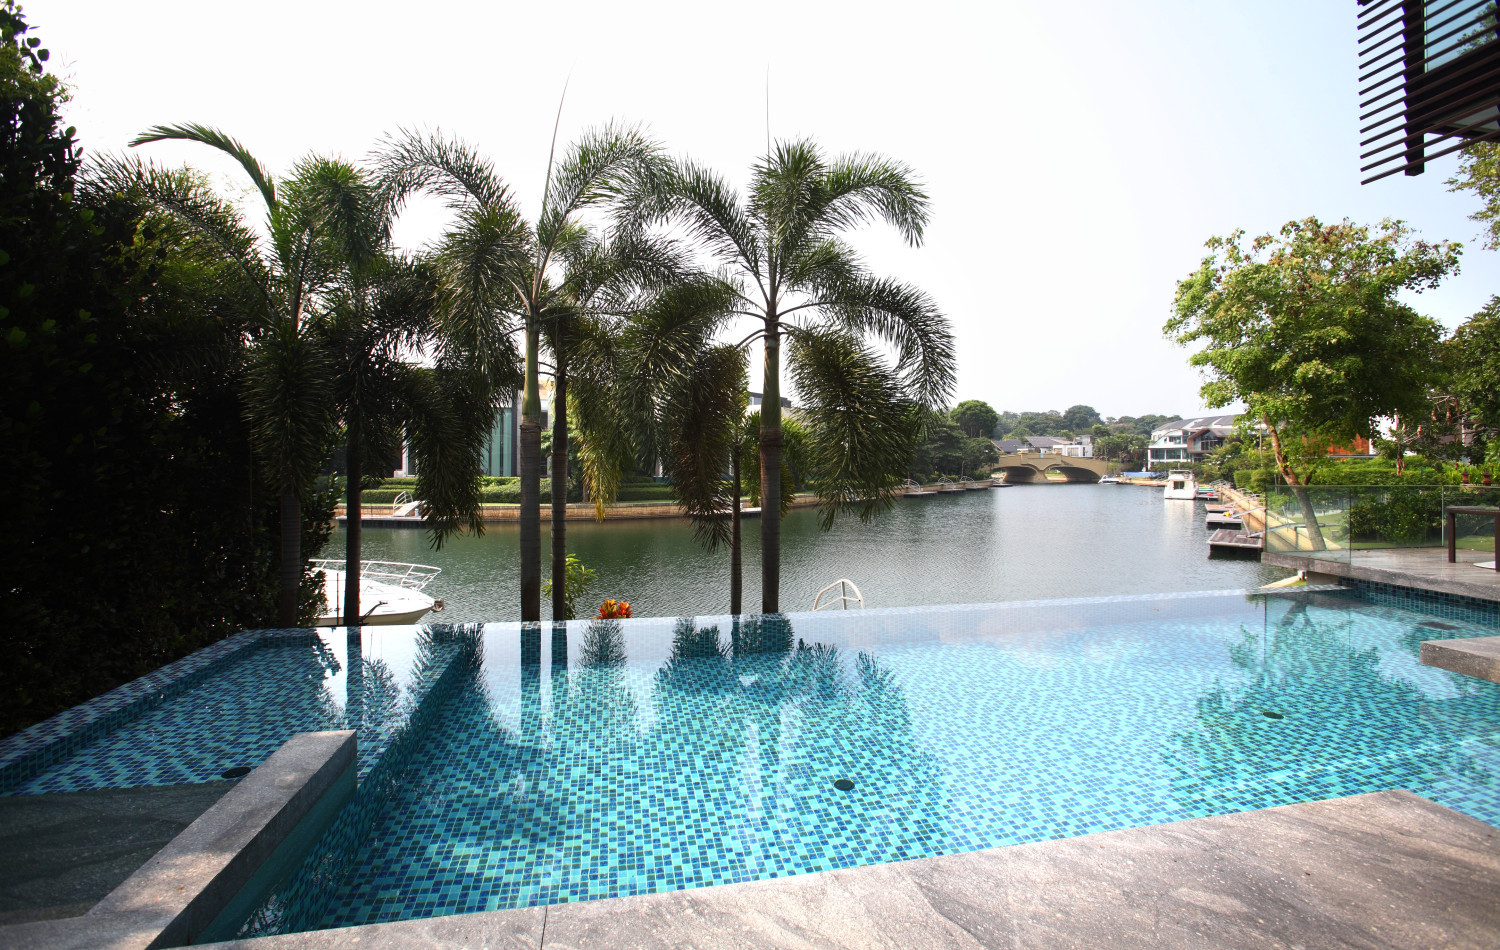 Are you paying too much for that pool view? - Property News